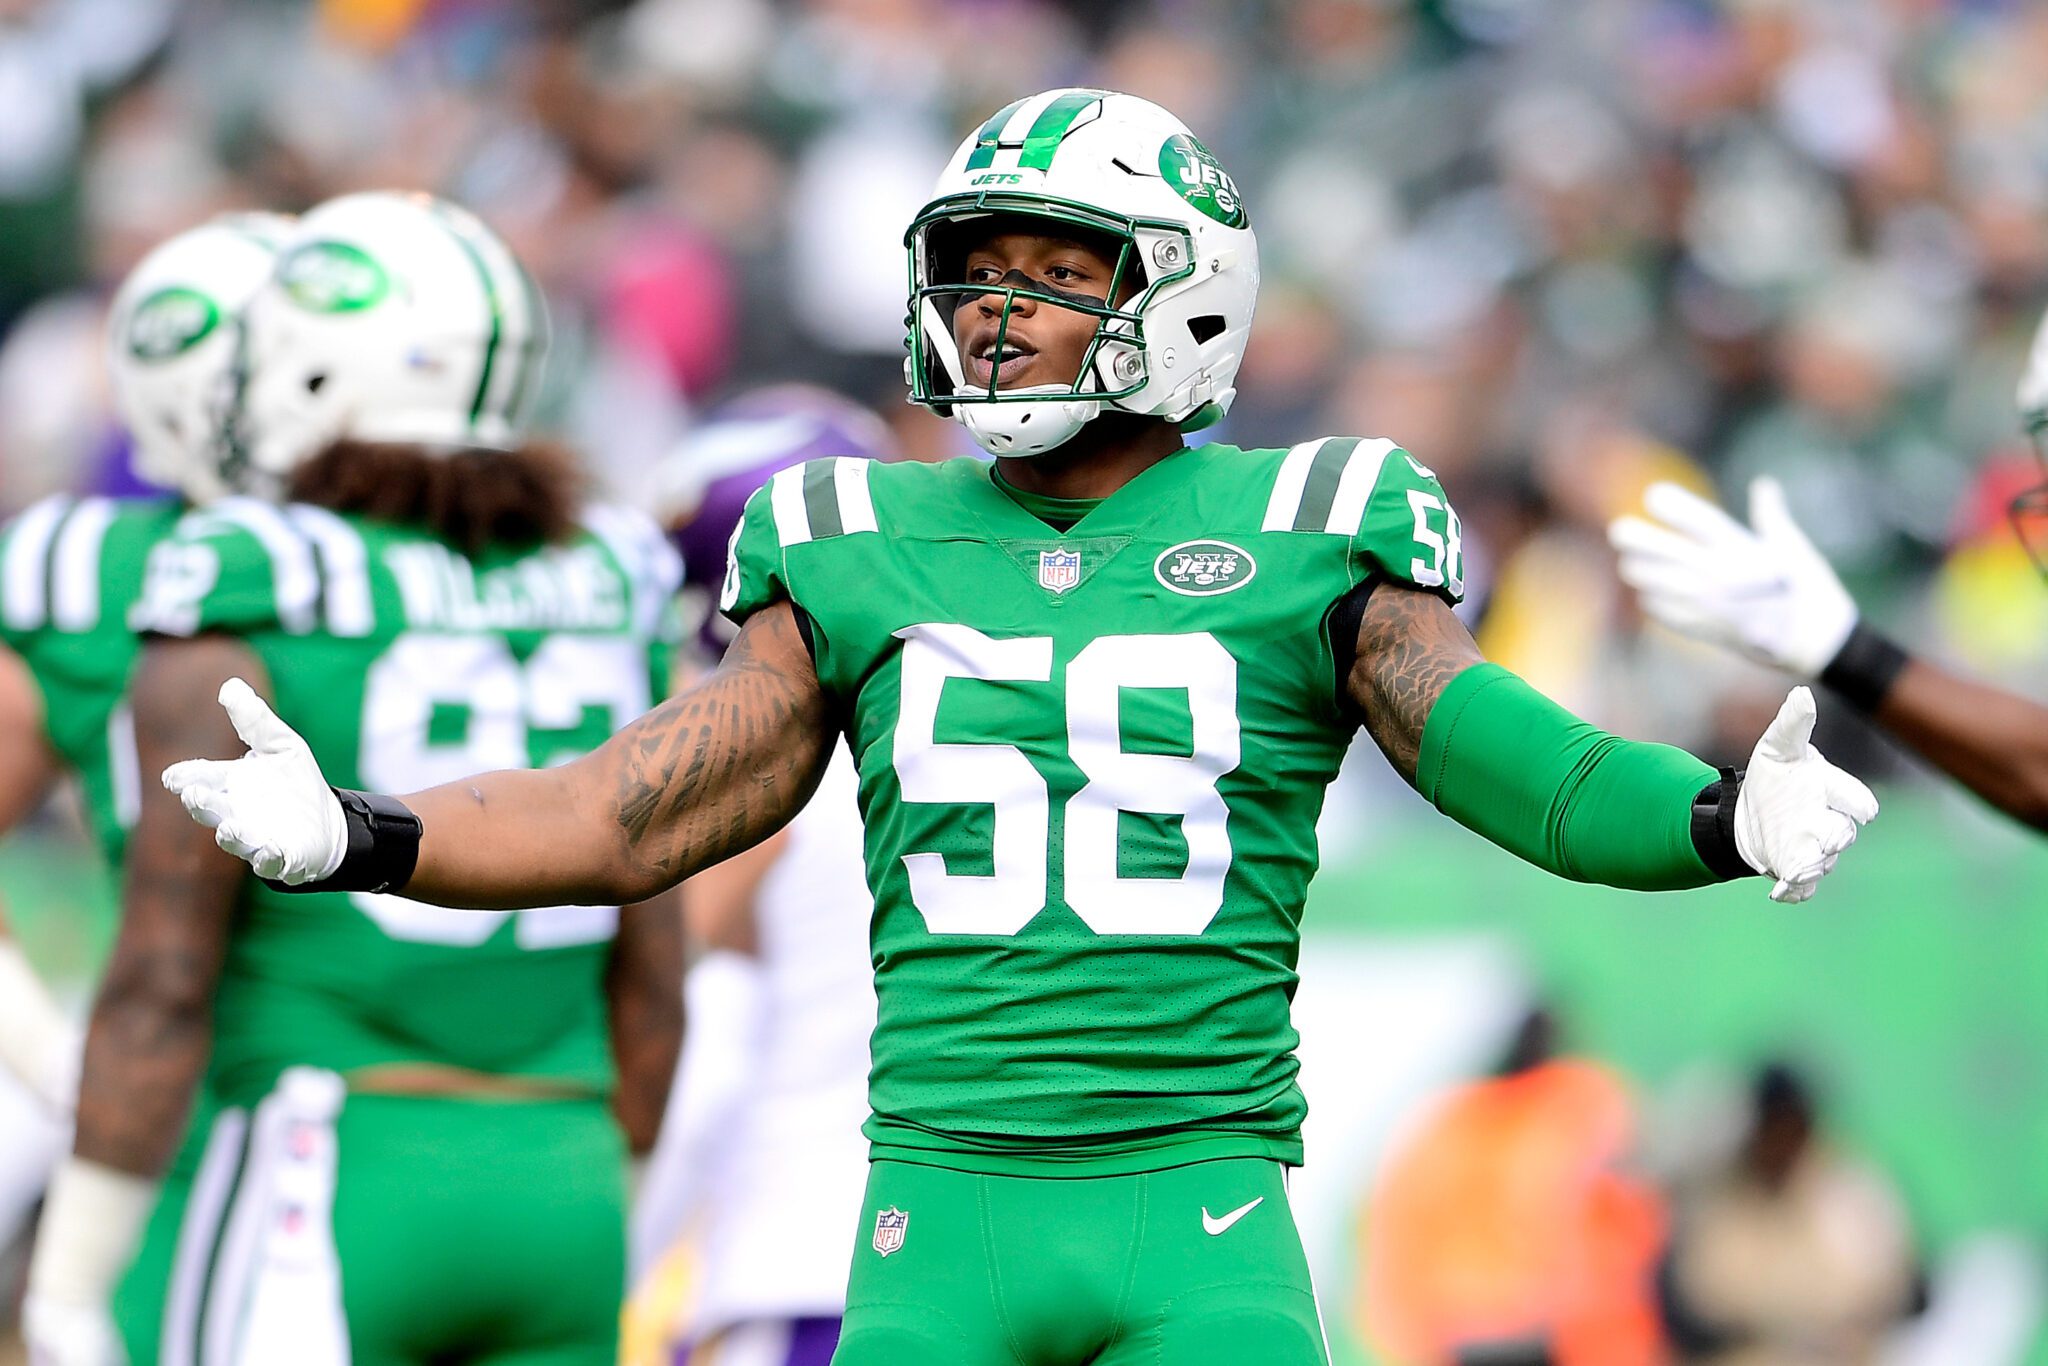 Former New York Jets first-round pick issued an arrest warrant after failing to show to court for domestic violence